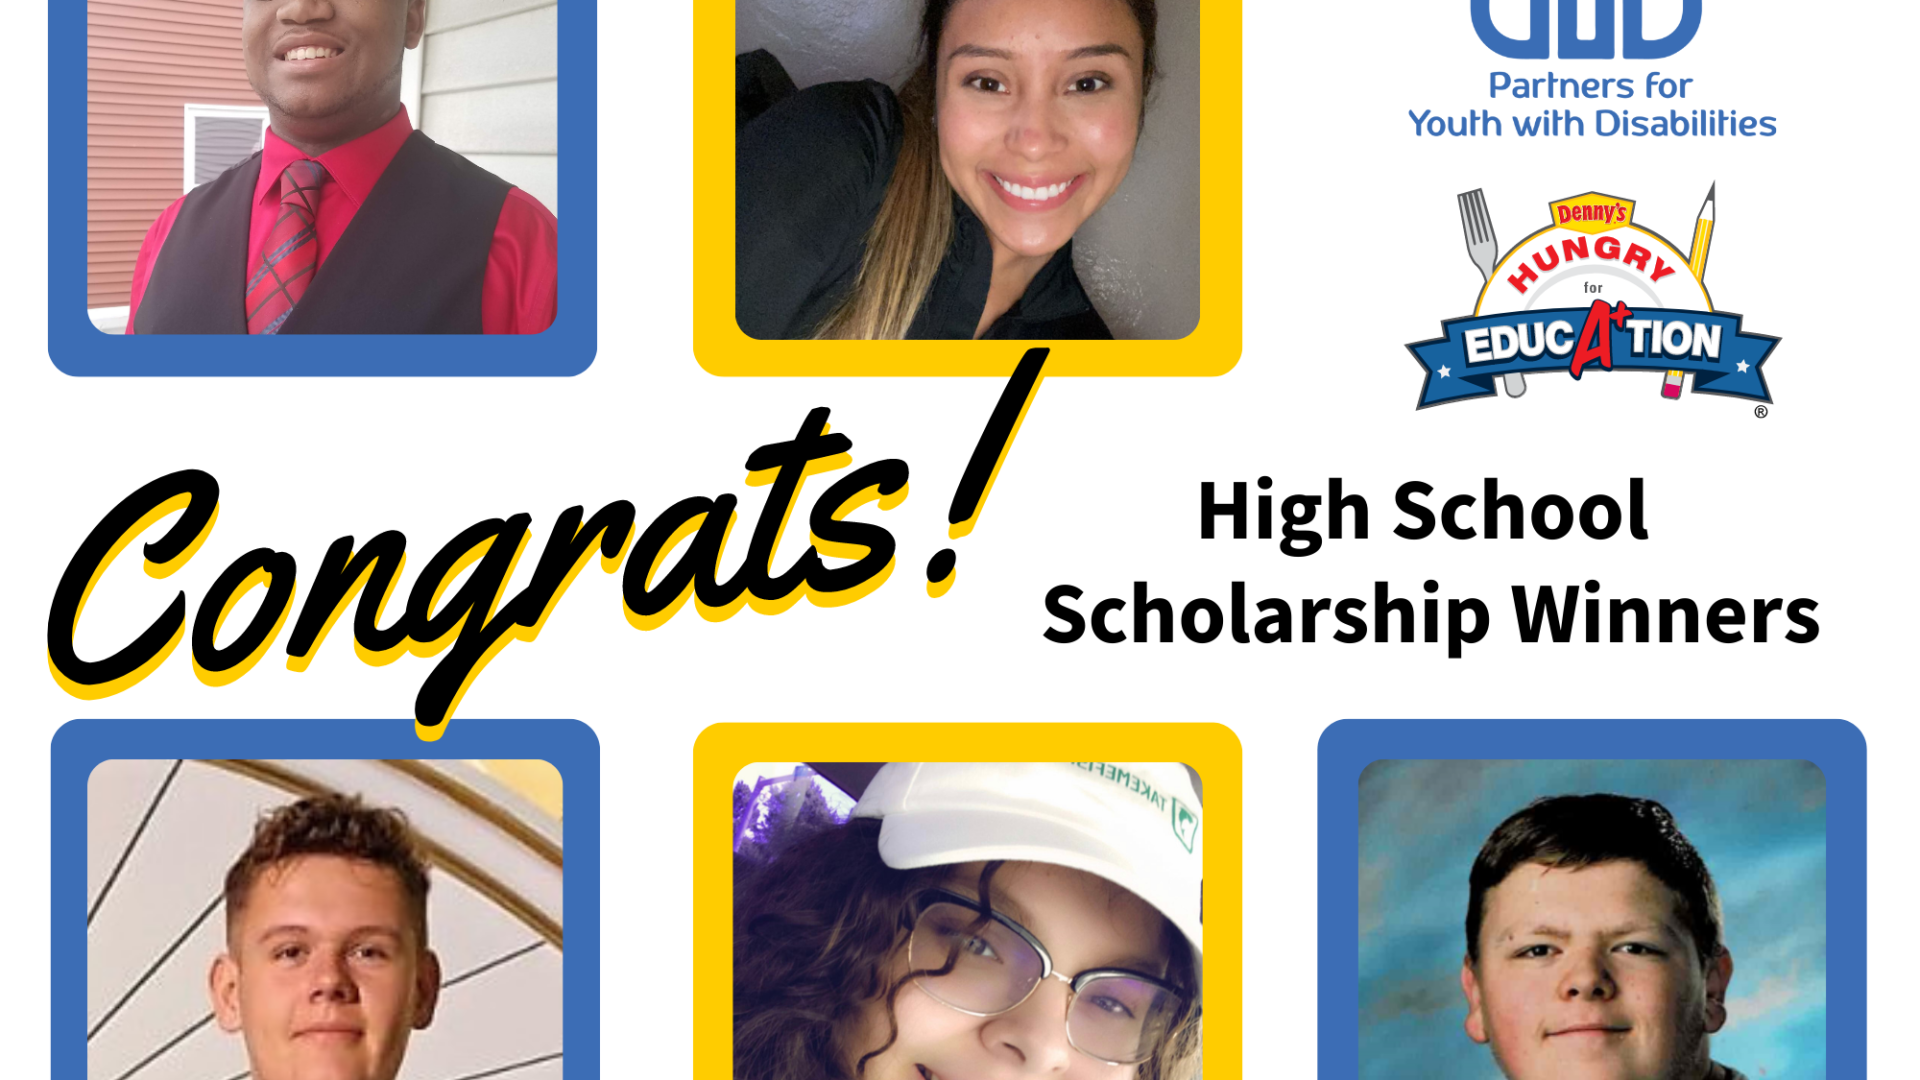 Denny's Hungry for Education high school scholarship winners